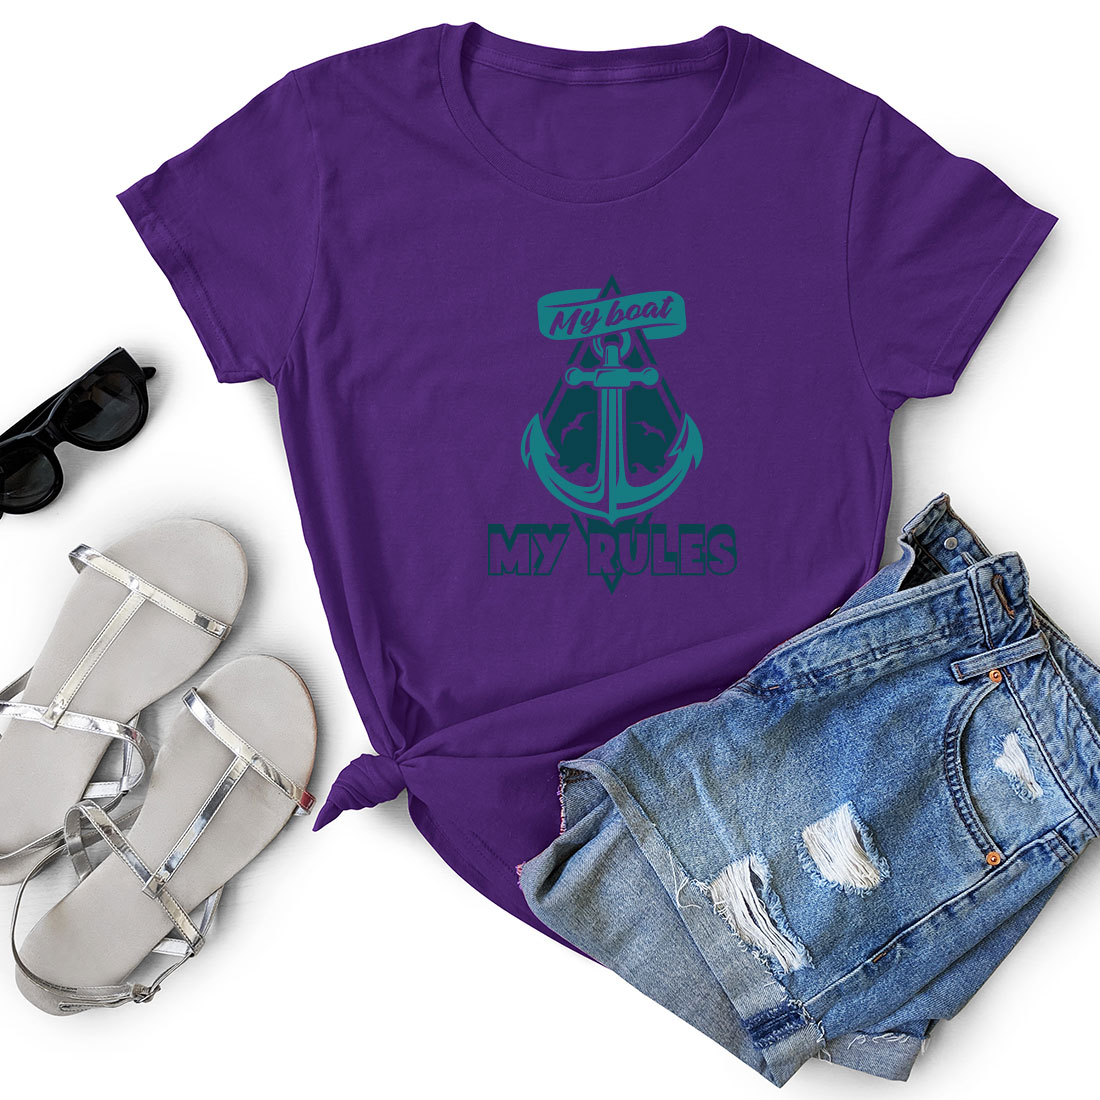 Purple t - shirt with a blue anchor on it.